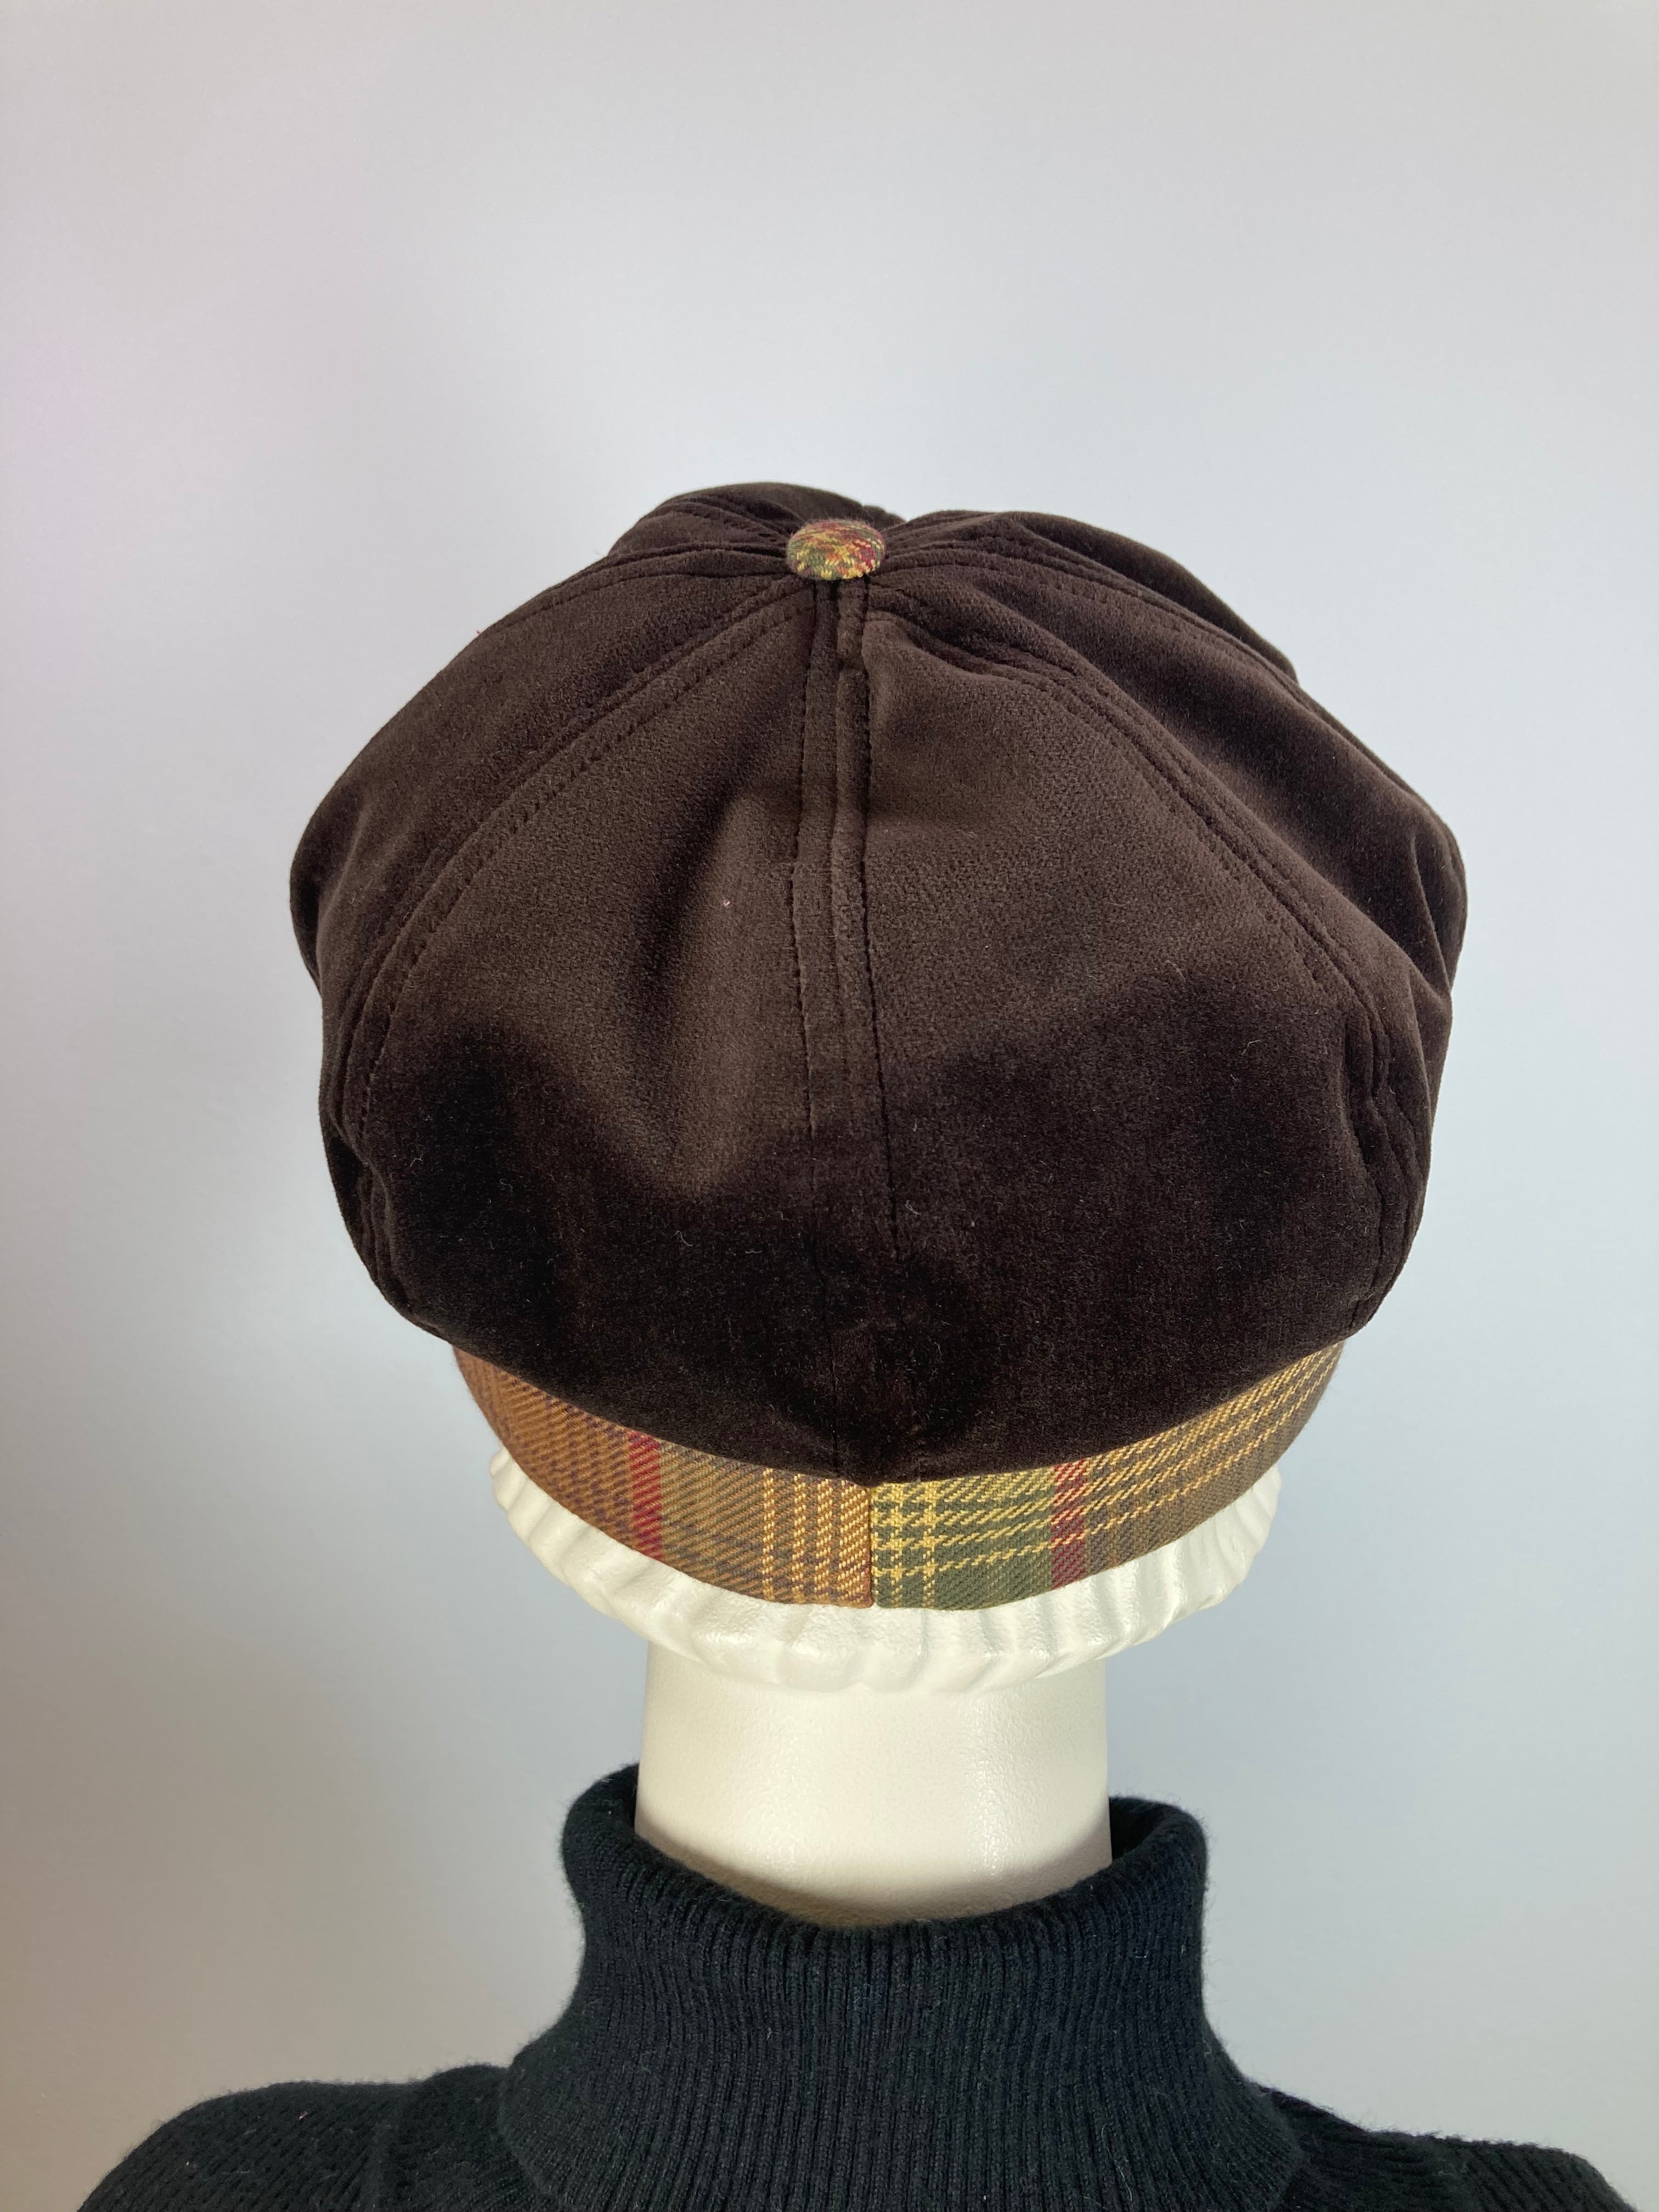 Womens Brown and Red Velvet Hat. Soft Newsboy Hat. Slouchy Newsboy Cap. Ladies Winter Hat. Sustainable fashion hat. Eco friendly hat.